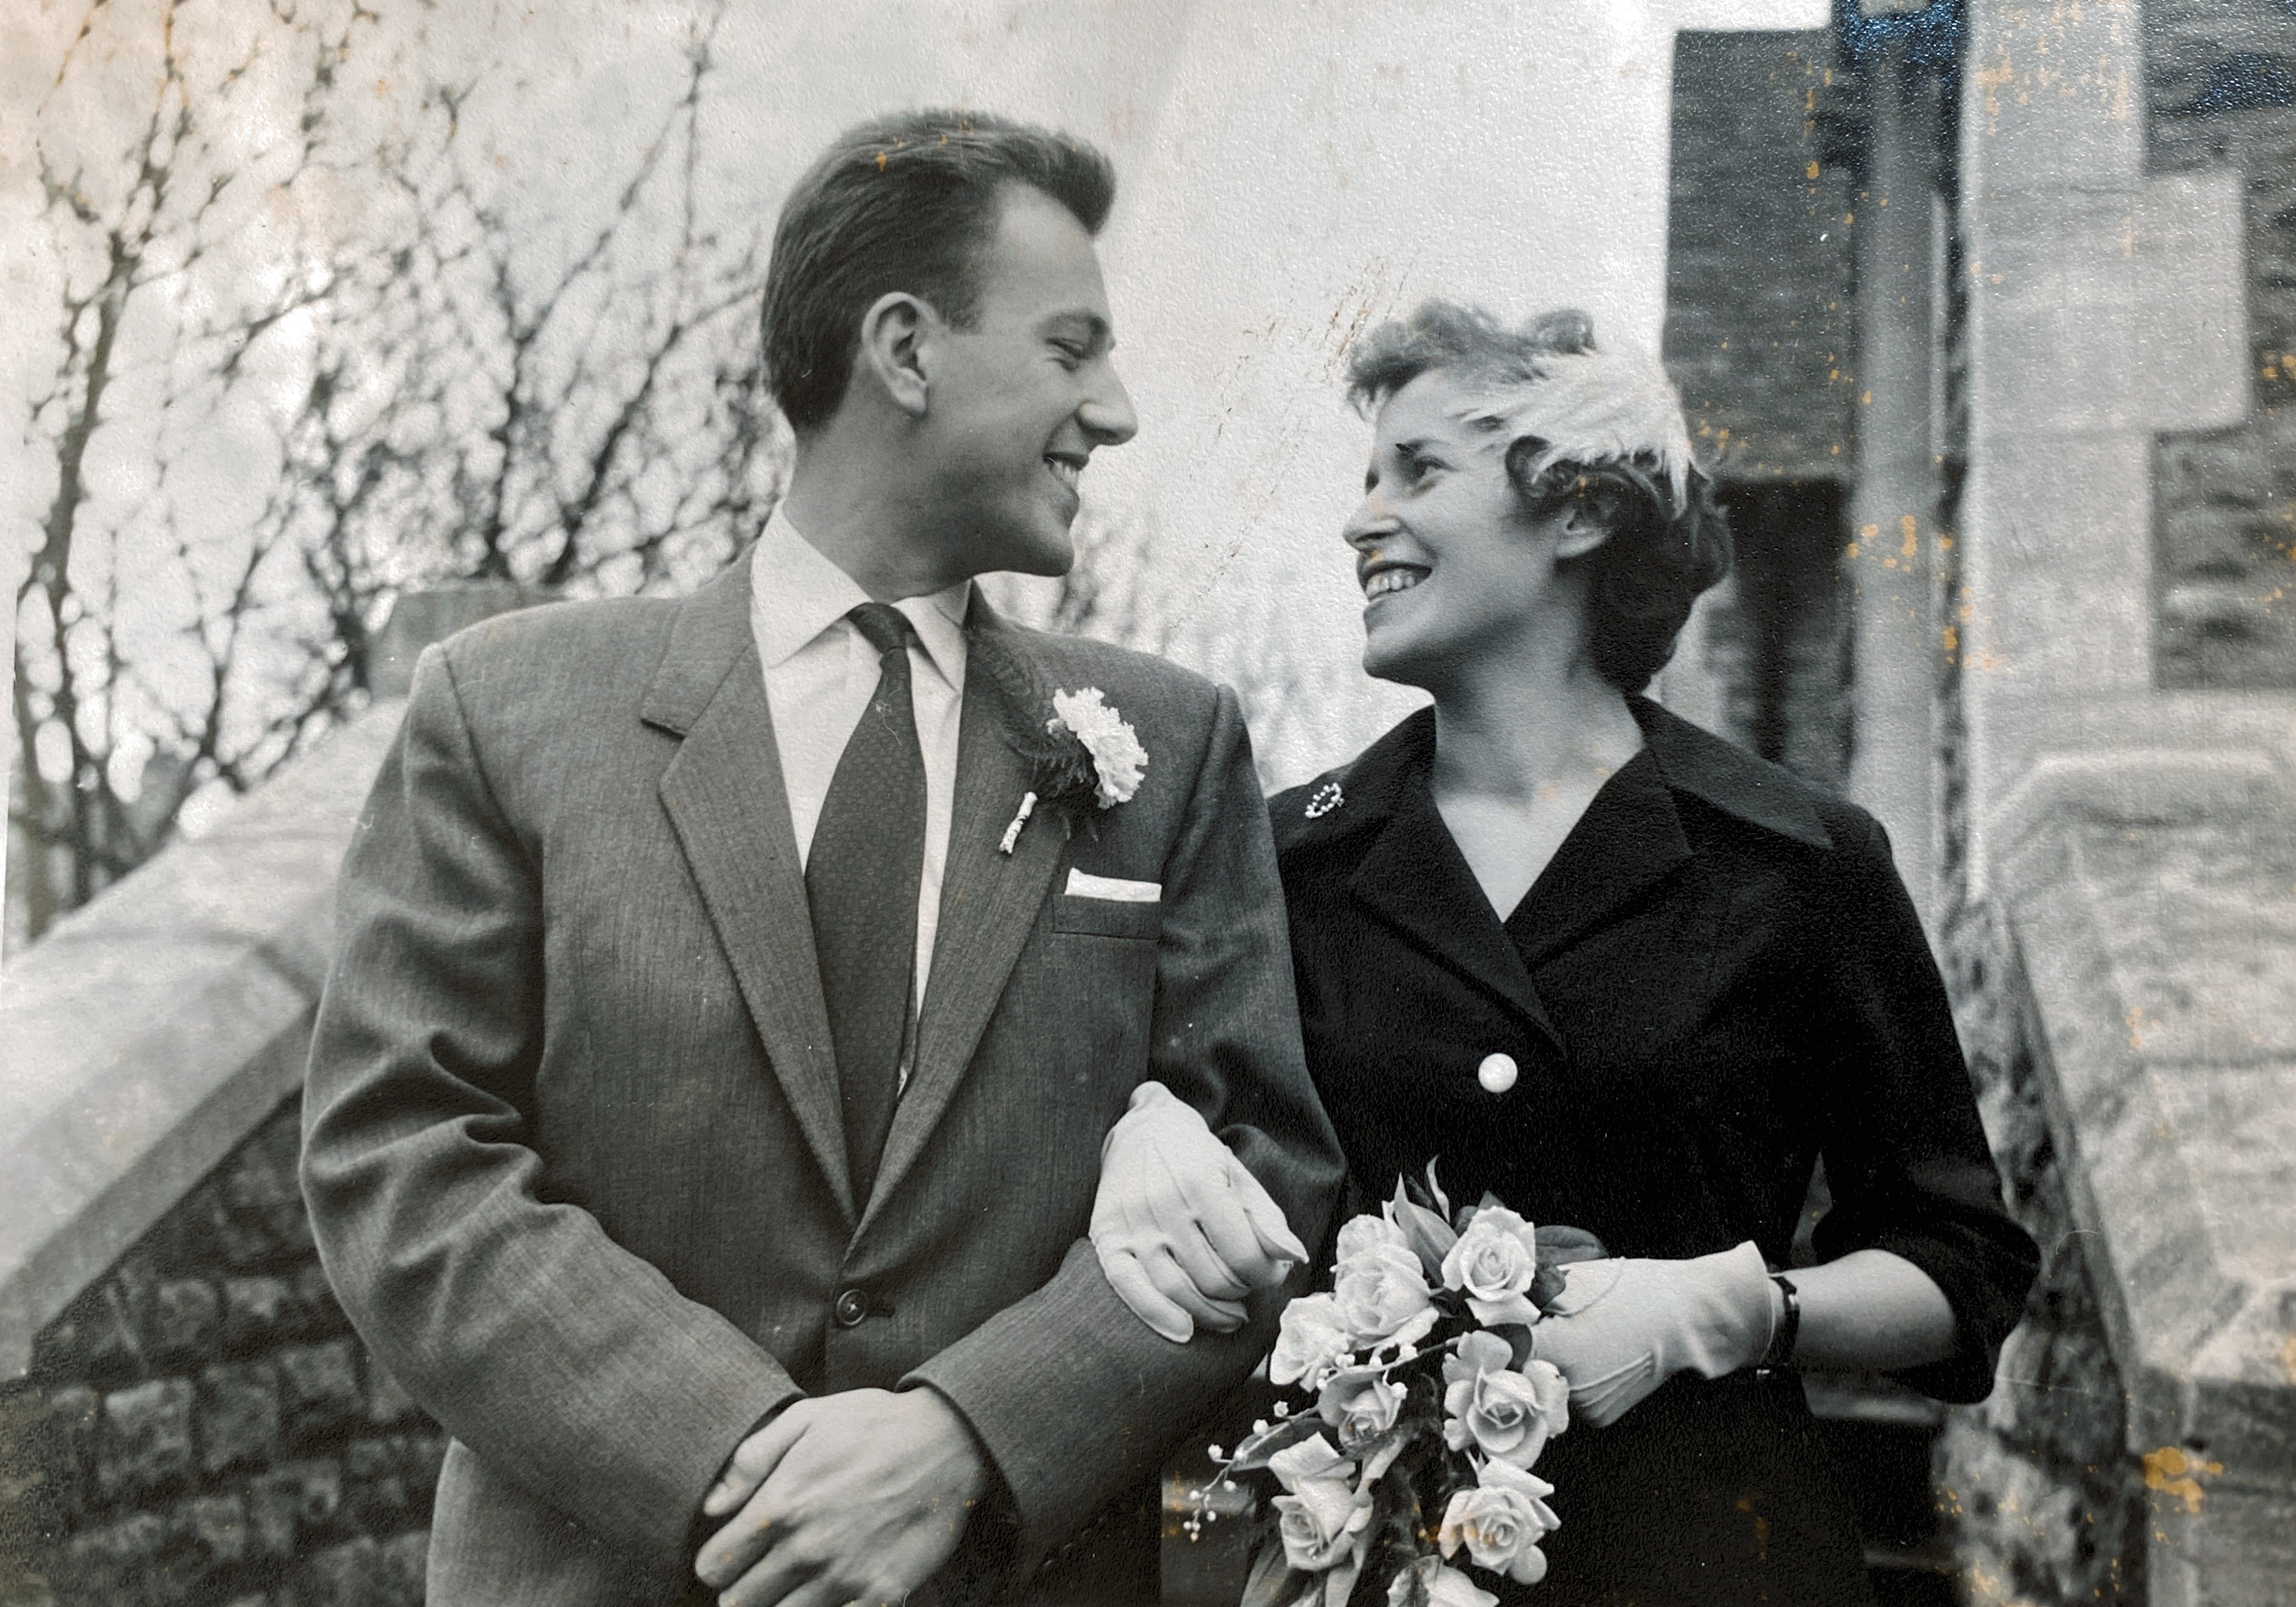 Mum and Dad on their wedding day 1958
Bryan and Petra Mercer